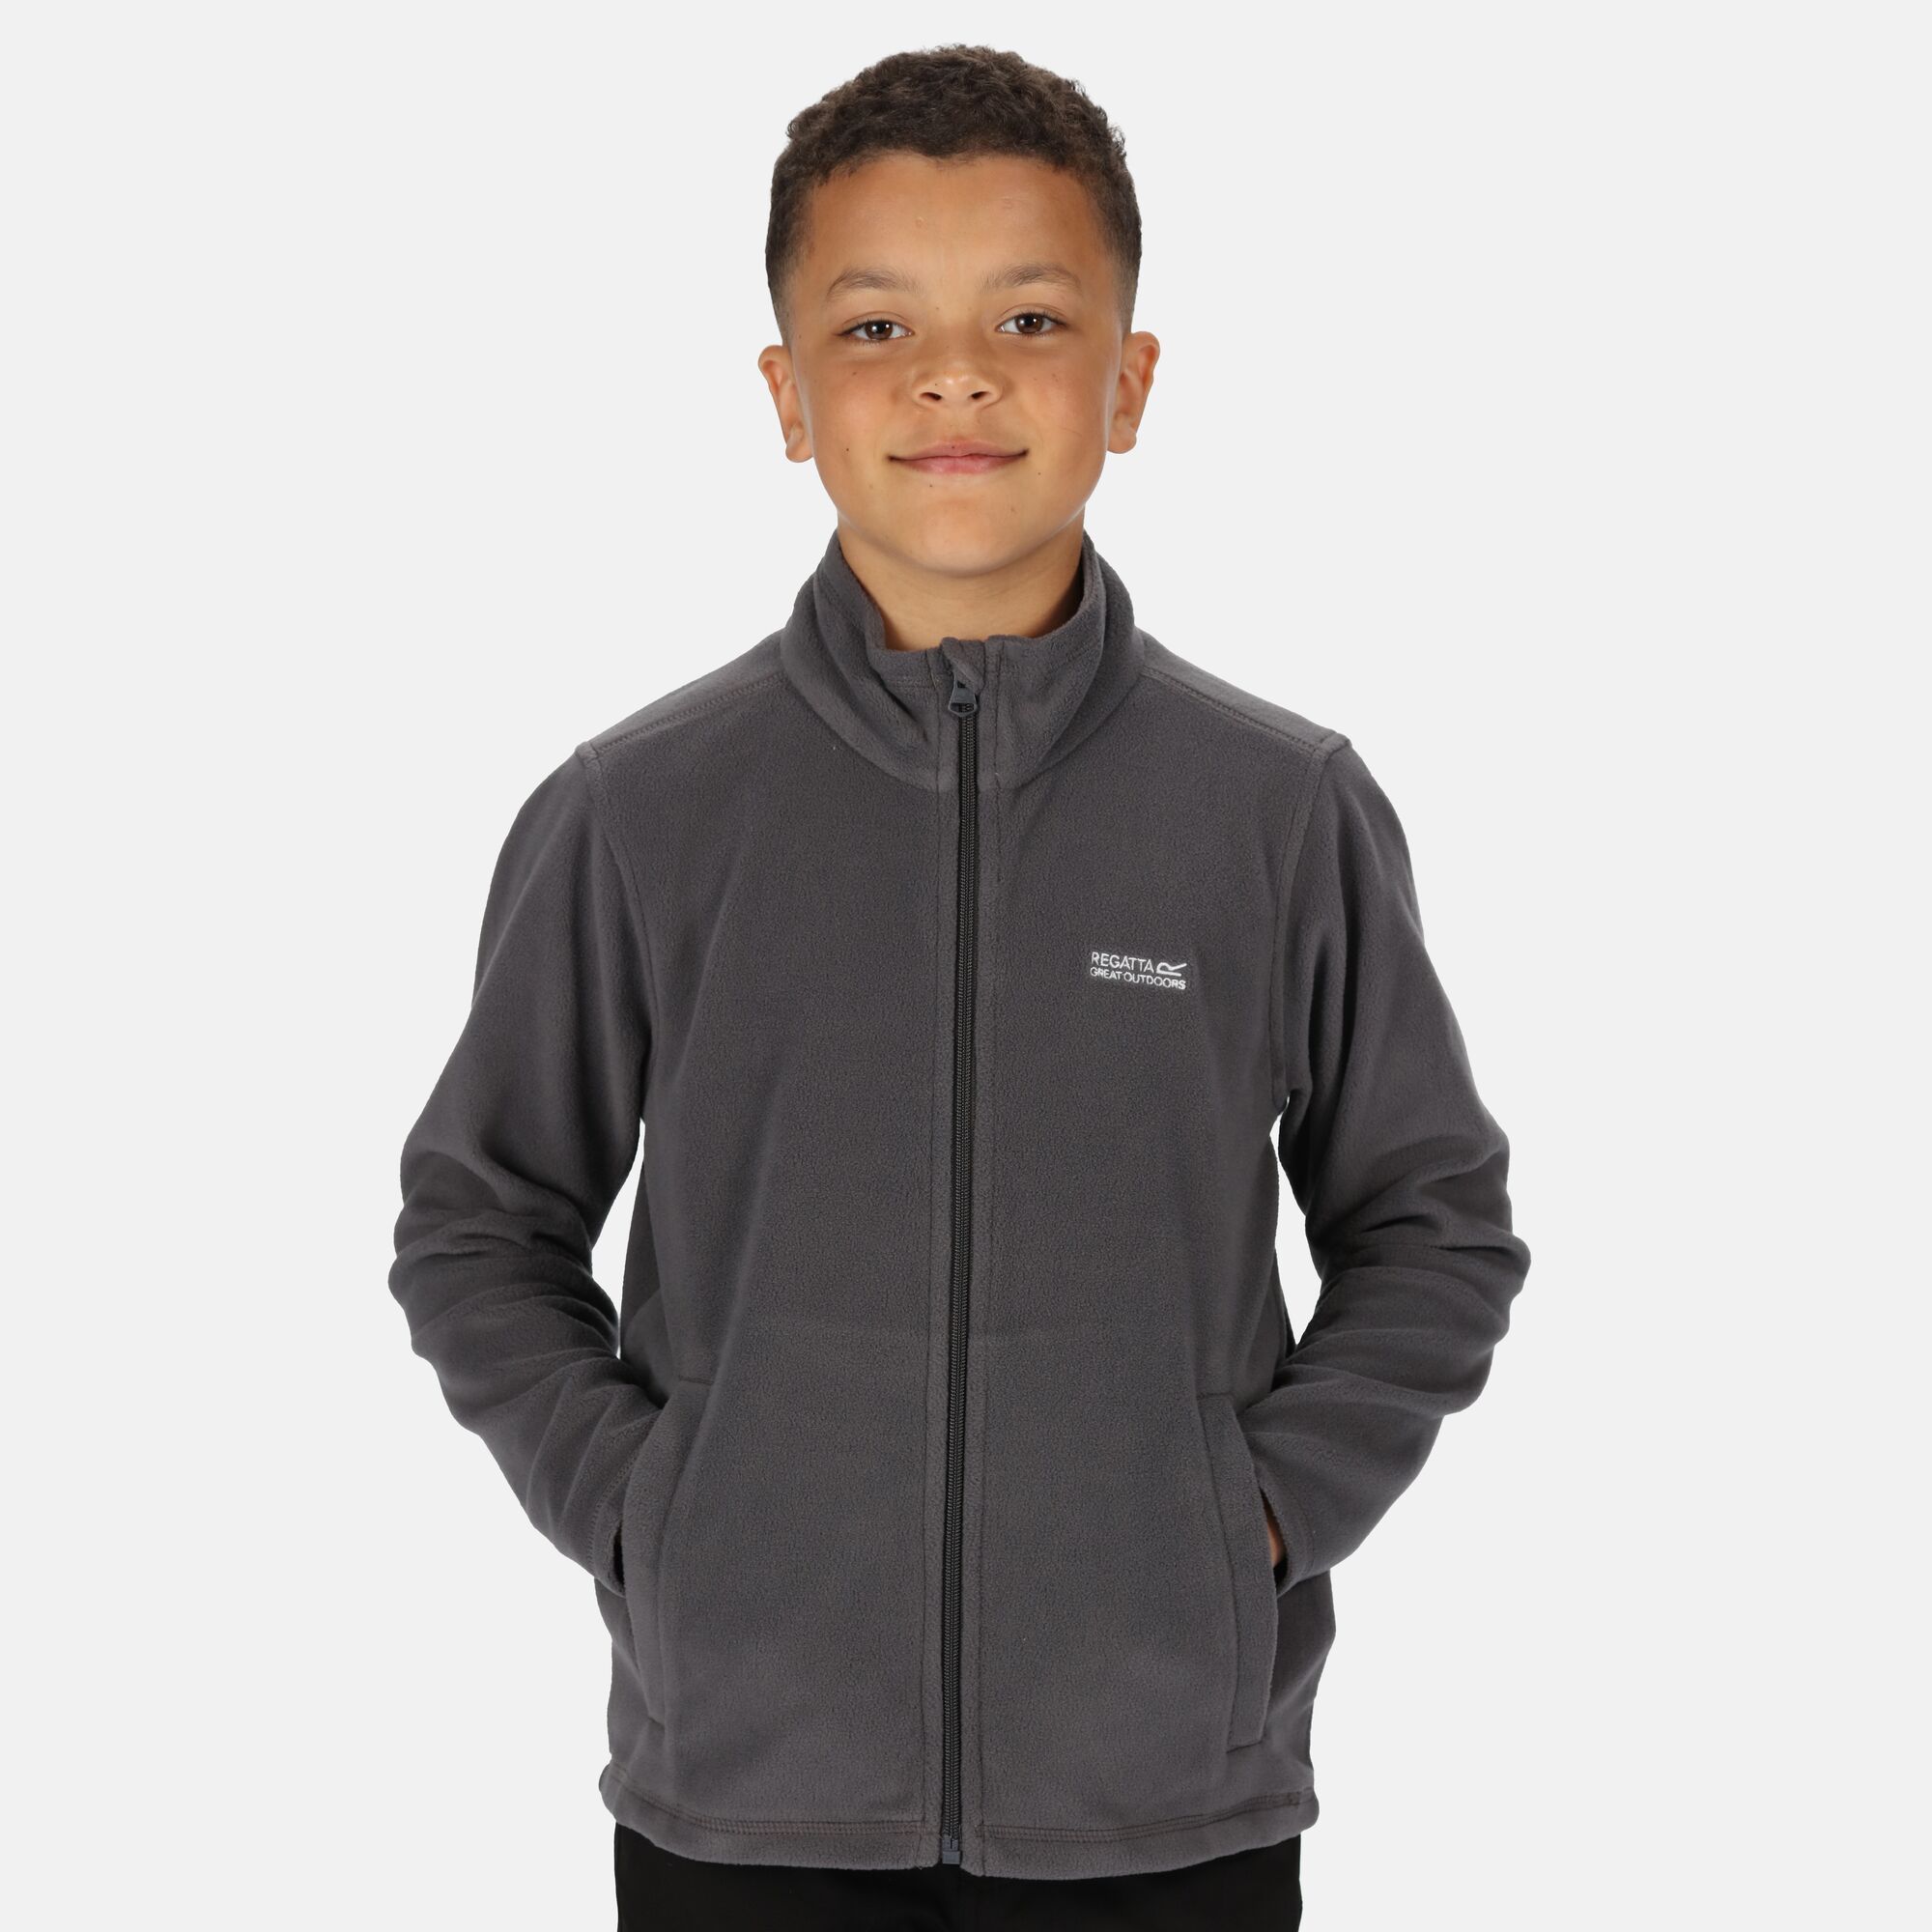 The King is our kids lighter weight zip through fleece. Its lovely and light, super soft and has an anti-pill finish to keep it looking fresh wear after wear. One of our best selling kids styles, its an outside essential must have you can trust to keep them comfy and warm, whether they are climbing trees, on the school run or playing around the garden. 100% Polyester. Regatta Kids Sizing (chest approx): 2 Years (53-55cm), 3-4 Years (55-57cm), 5-6 Years (59-61cm), 7-8 Years (63-67cm), 9-10 Years (69-73cm), 11-12 Years (75-79cm), 32